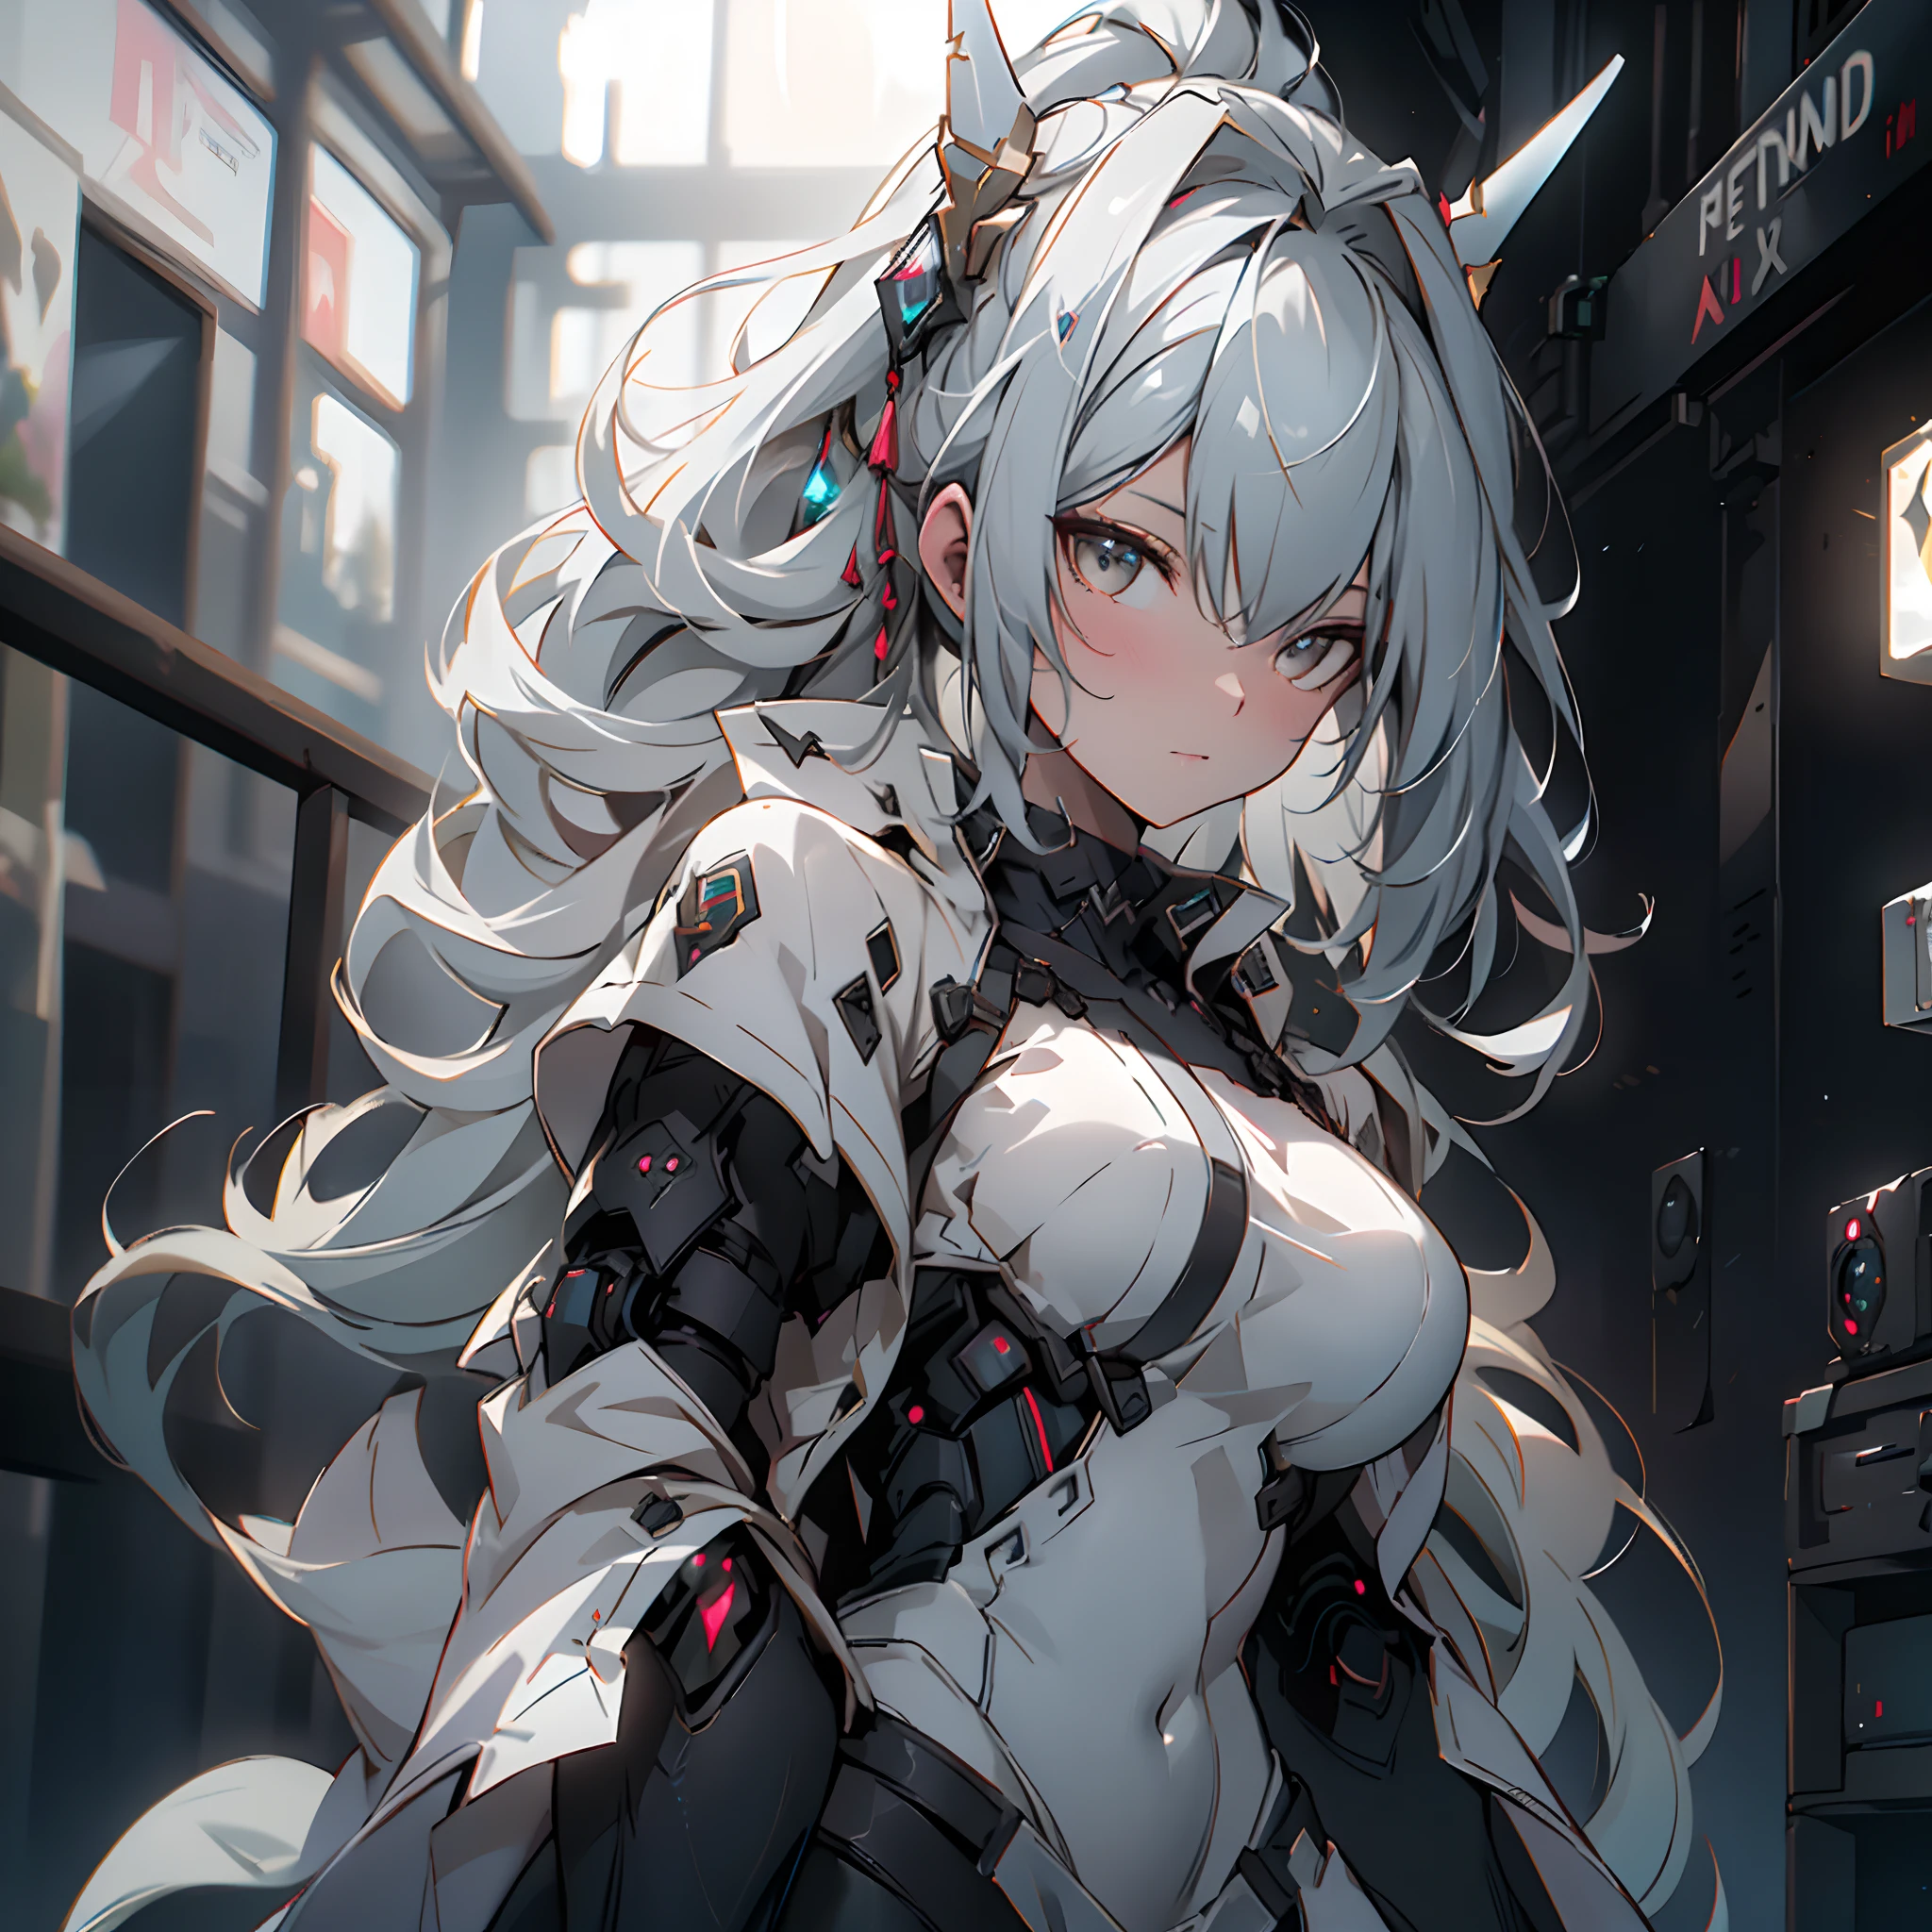 1 adult woman, alone, High detail mature face, long ponytail silver hair, gold eyes, white china dress with black strip, wear 2 small mech horn on the head, high res, ultra sharp, 8k, masterpiece, looking at viewer, long black gloves, Sharp eyes, ((Best quality)), ((masterpiece)), 3D, HDR (High Dynamic Range),Ray Tracing, NVIDIA RTX, Super-Resolution, Unreal 5,Subsurface scattering, PBR Texturing, Post-processing, Anisotropic Filtering, Depth-of-field, Maximum clarity and sharpness, Multi-layered textures, Albedo and Specular maps, Surface shading, Accurate simulation of light-material interaction, Perfect proportions, Octane Render, Two-tone lighting, Wide aperture, Low ISO, White balance, Rule of thirds,8K RAW, Aura, masterpiece, best quality, Mysterious expression, magical effects like sparkles or energy, flowing robes or enchanting attire, mechanic creatures or mystical background, rim lighting, side lighting, cinematic light, ultra high res, 8k uhd, film grain, best shadow, delicate, RAW, light particles, detailed skin texture, detailed cloth texture, beautiful face, fighting stance